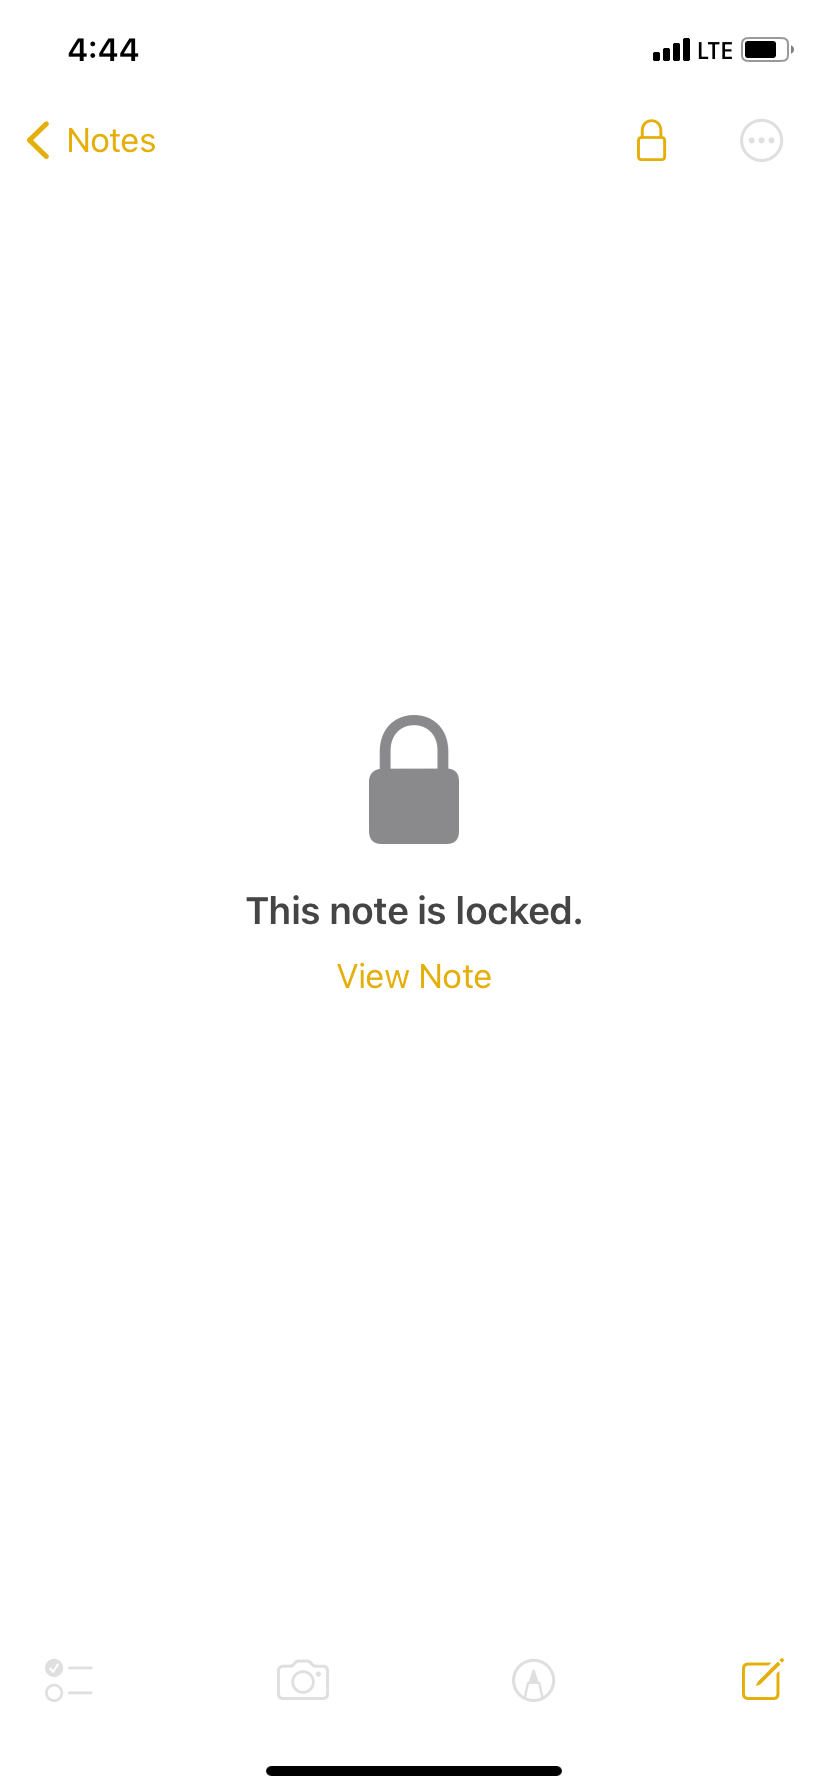 Image shows a locked note inside Apple Notes